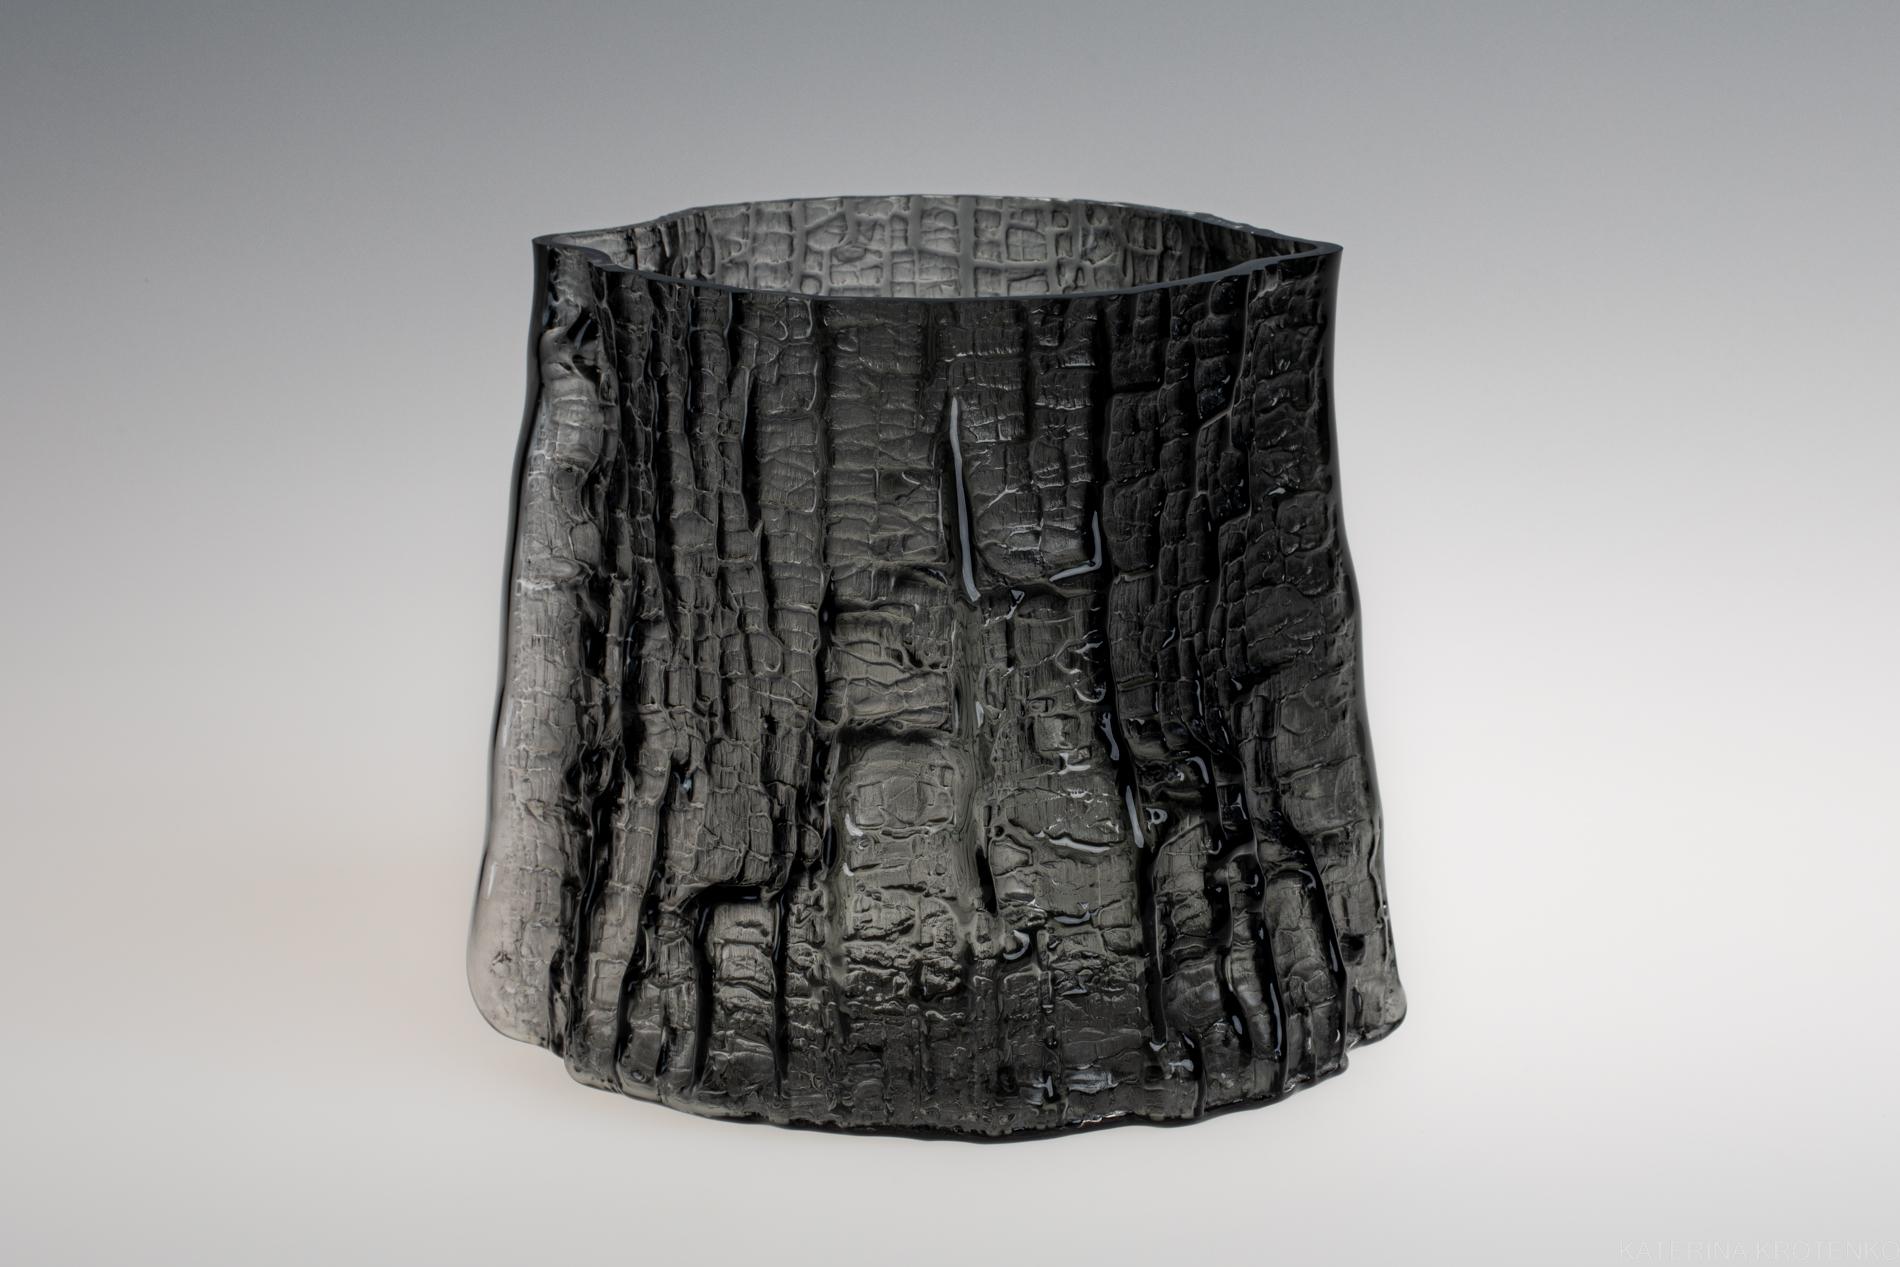 Shaped by fire — sculptural glass vase, volume IV, smoky dark grey - Contemporary Sculpture by Katerina Krotenko